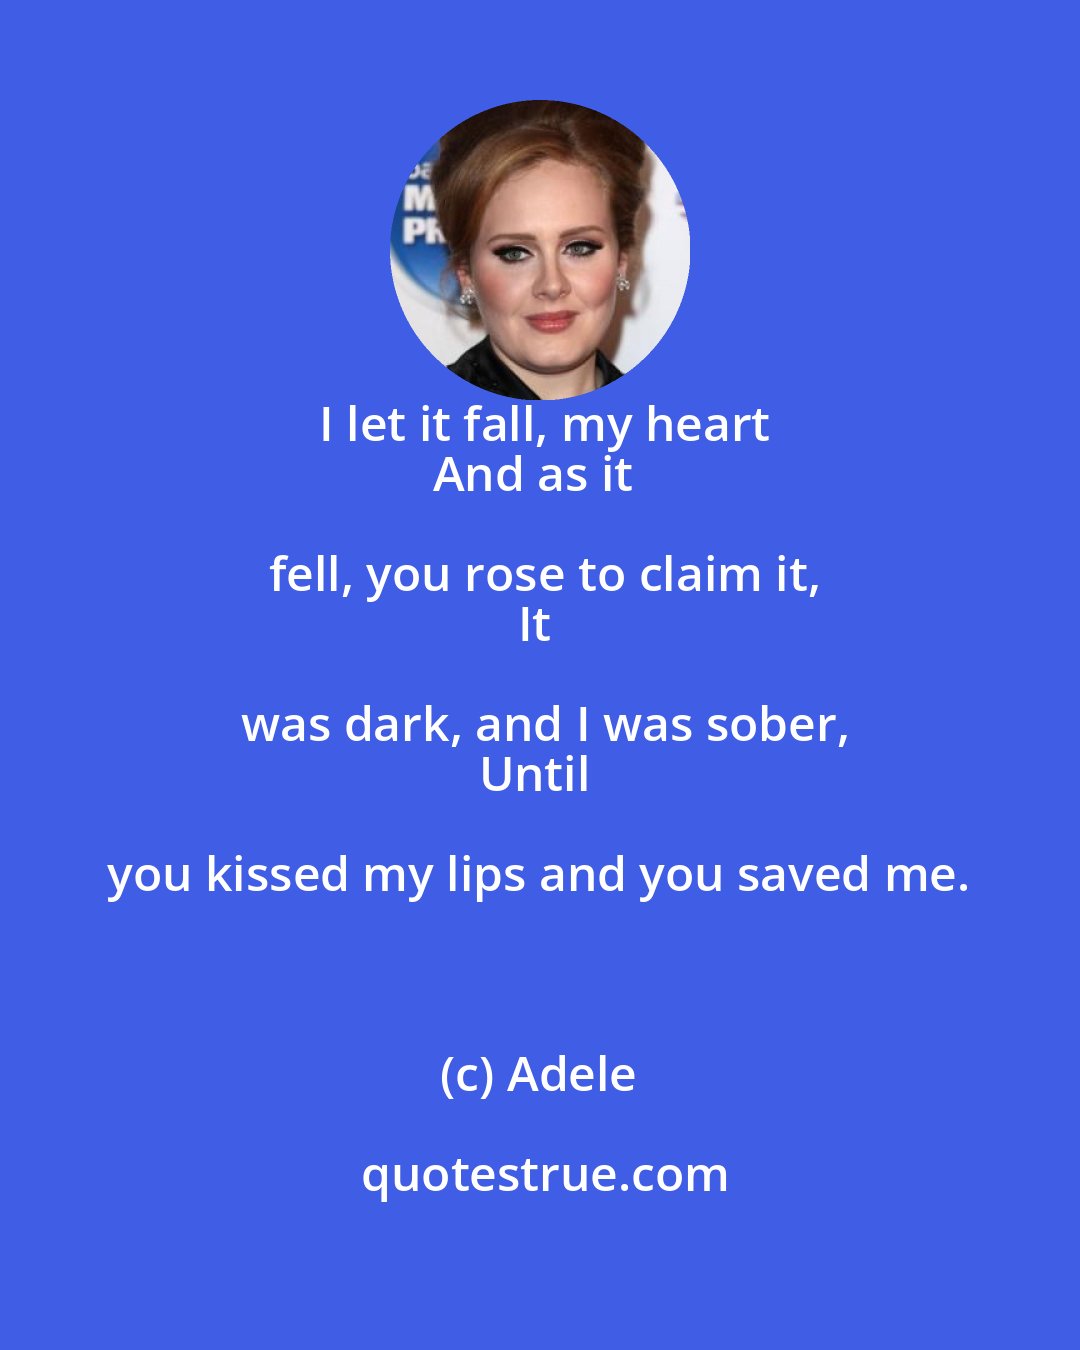 Adele: I let it fall, my heart
And as it fell, you rose to claim it,
It was dark, and I was sober,
Until you kissed my lips and you saved me.